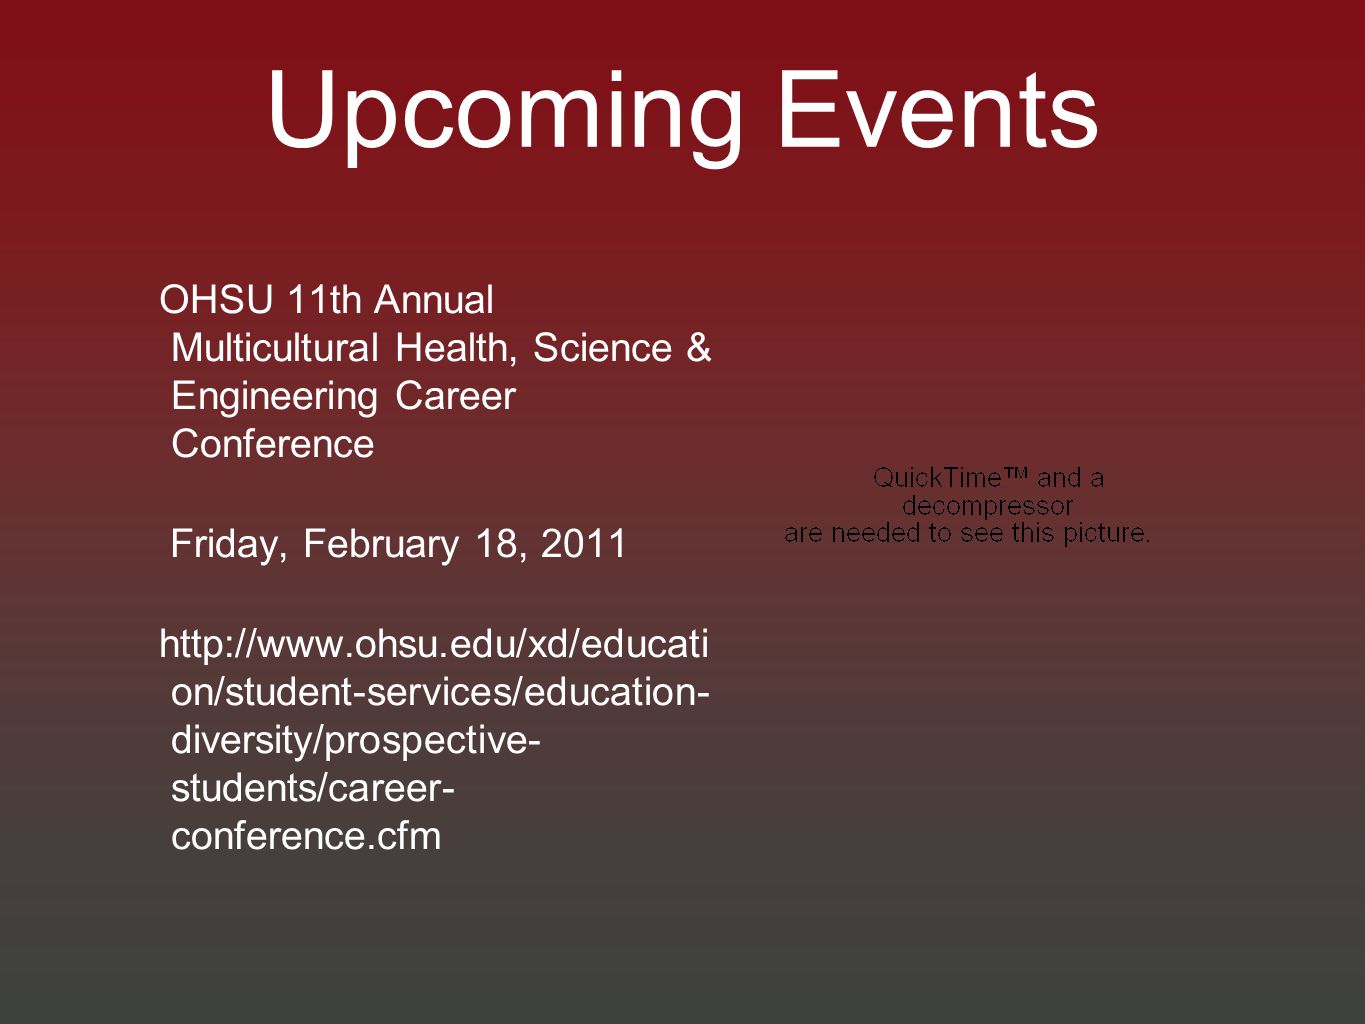 Upcoming Events OHSU 11th Annual Multicultural Health, Science & Engineering Career Conference Friday, February 18, on/student-services/education- diversity/prospective- students/career- conference.cfm